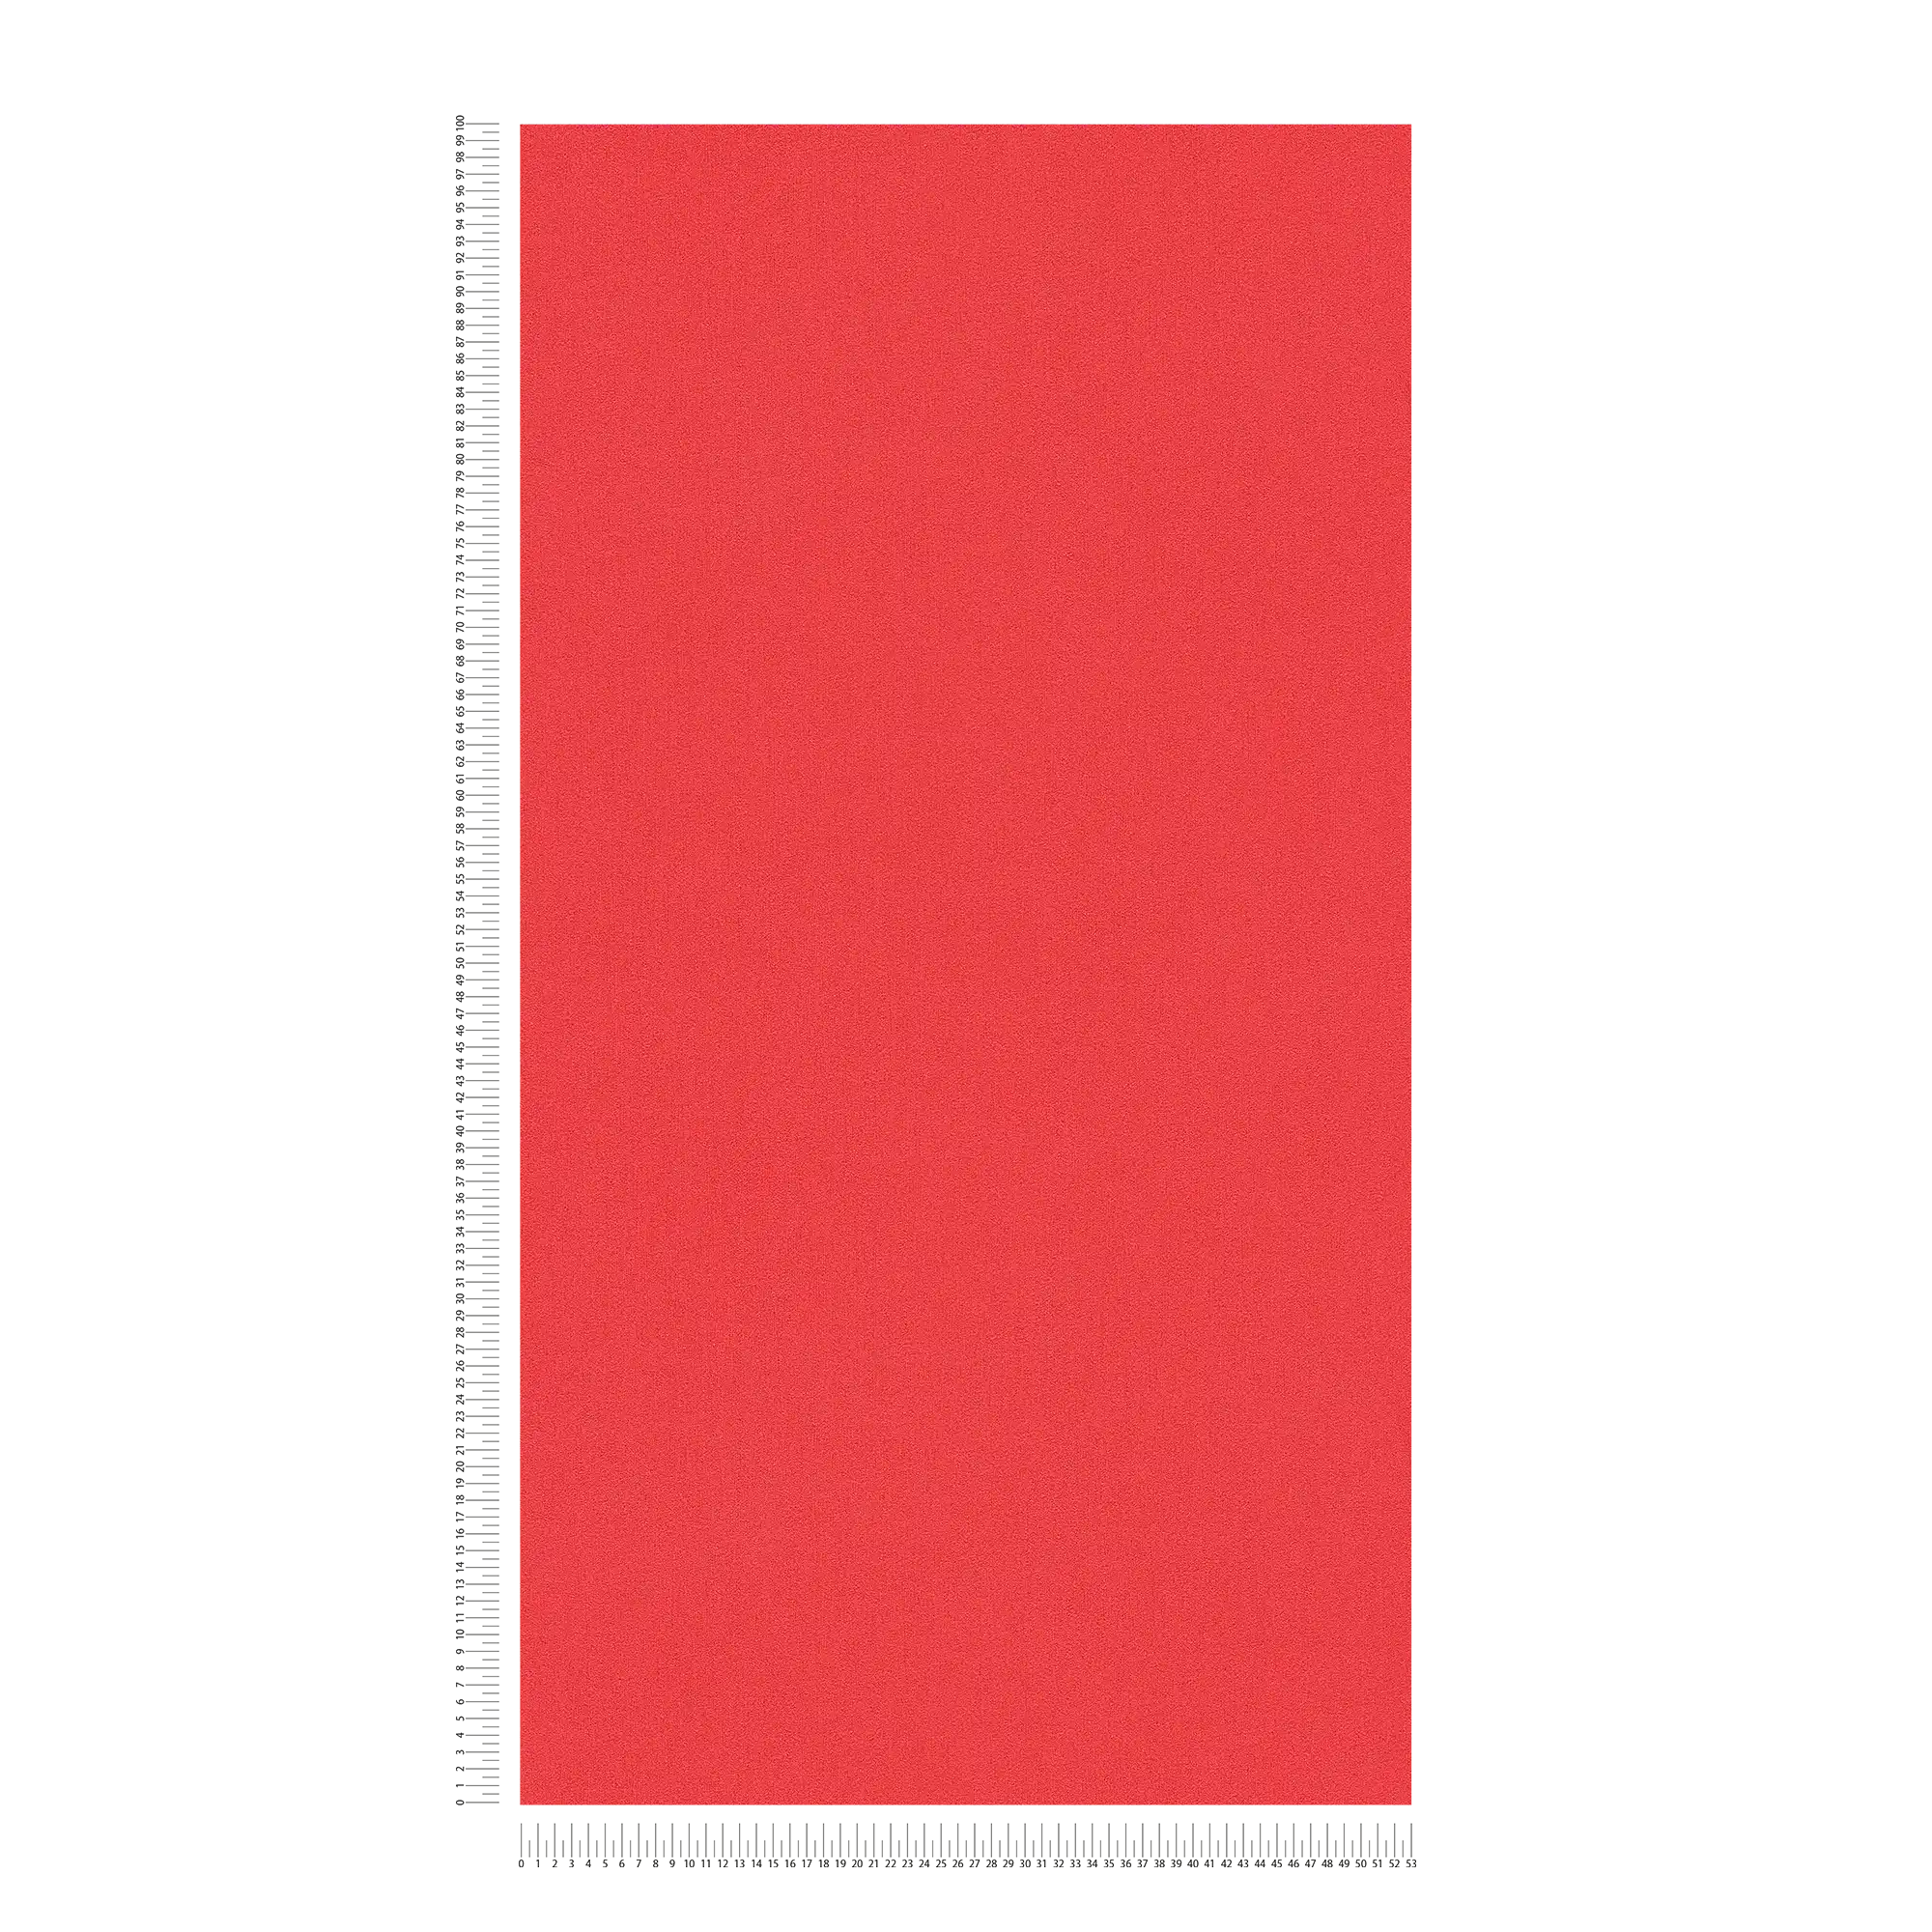             Plain wallpaper Karl LAGERFELD with structure embossing - red
        